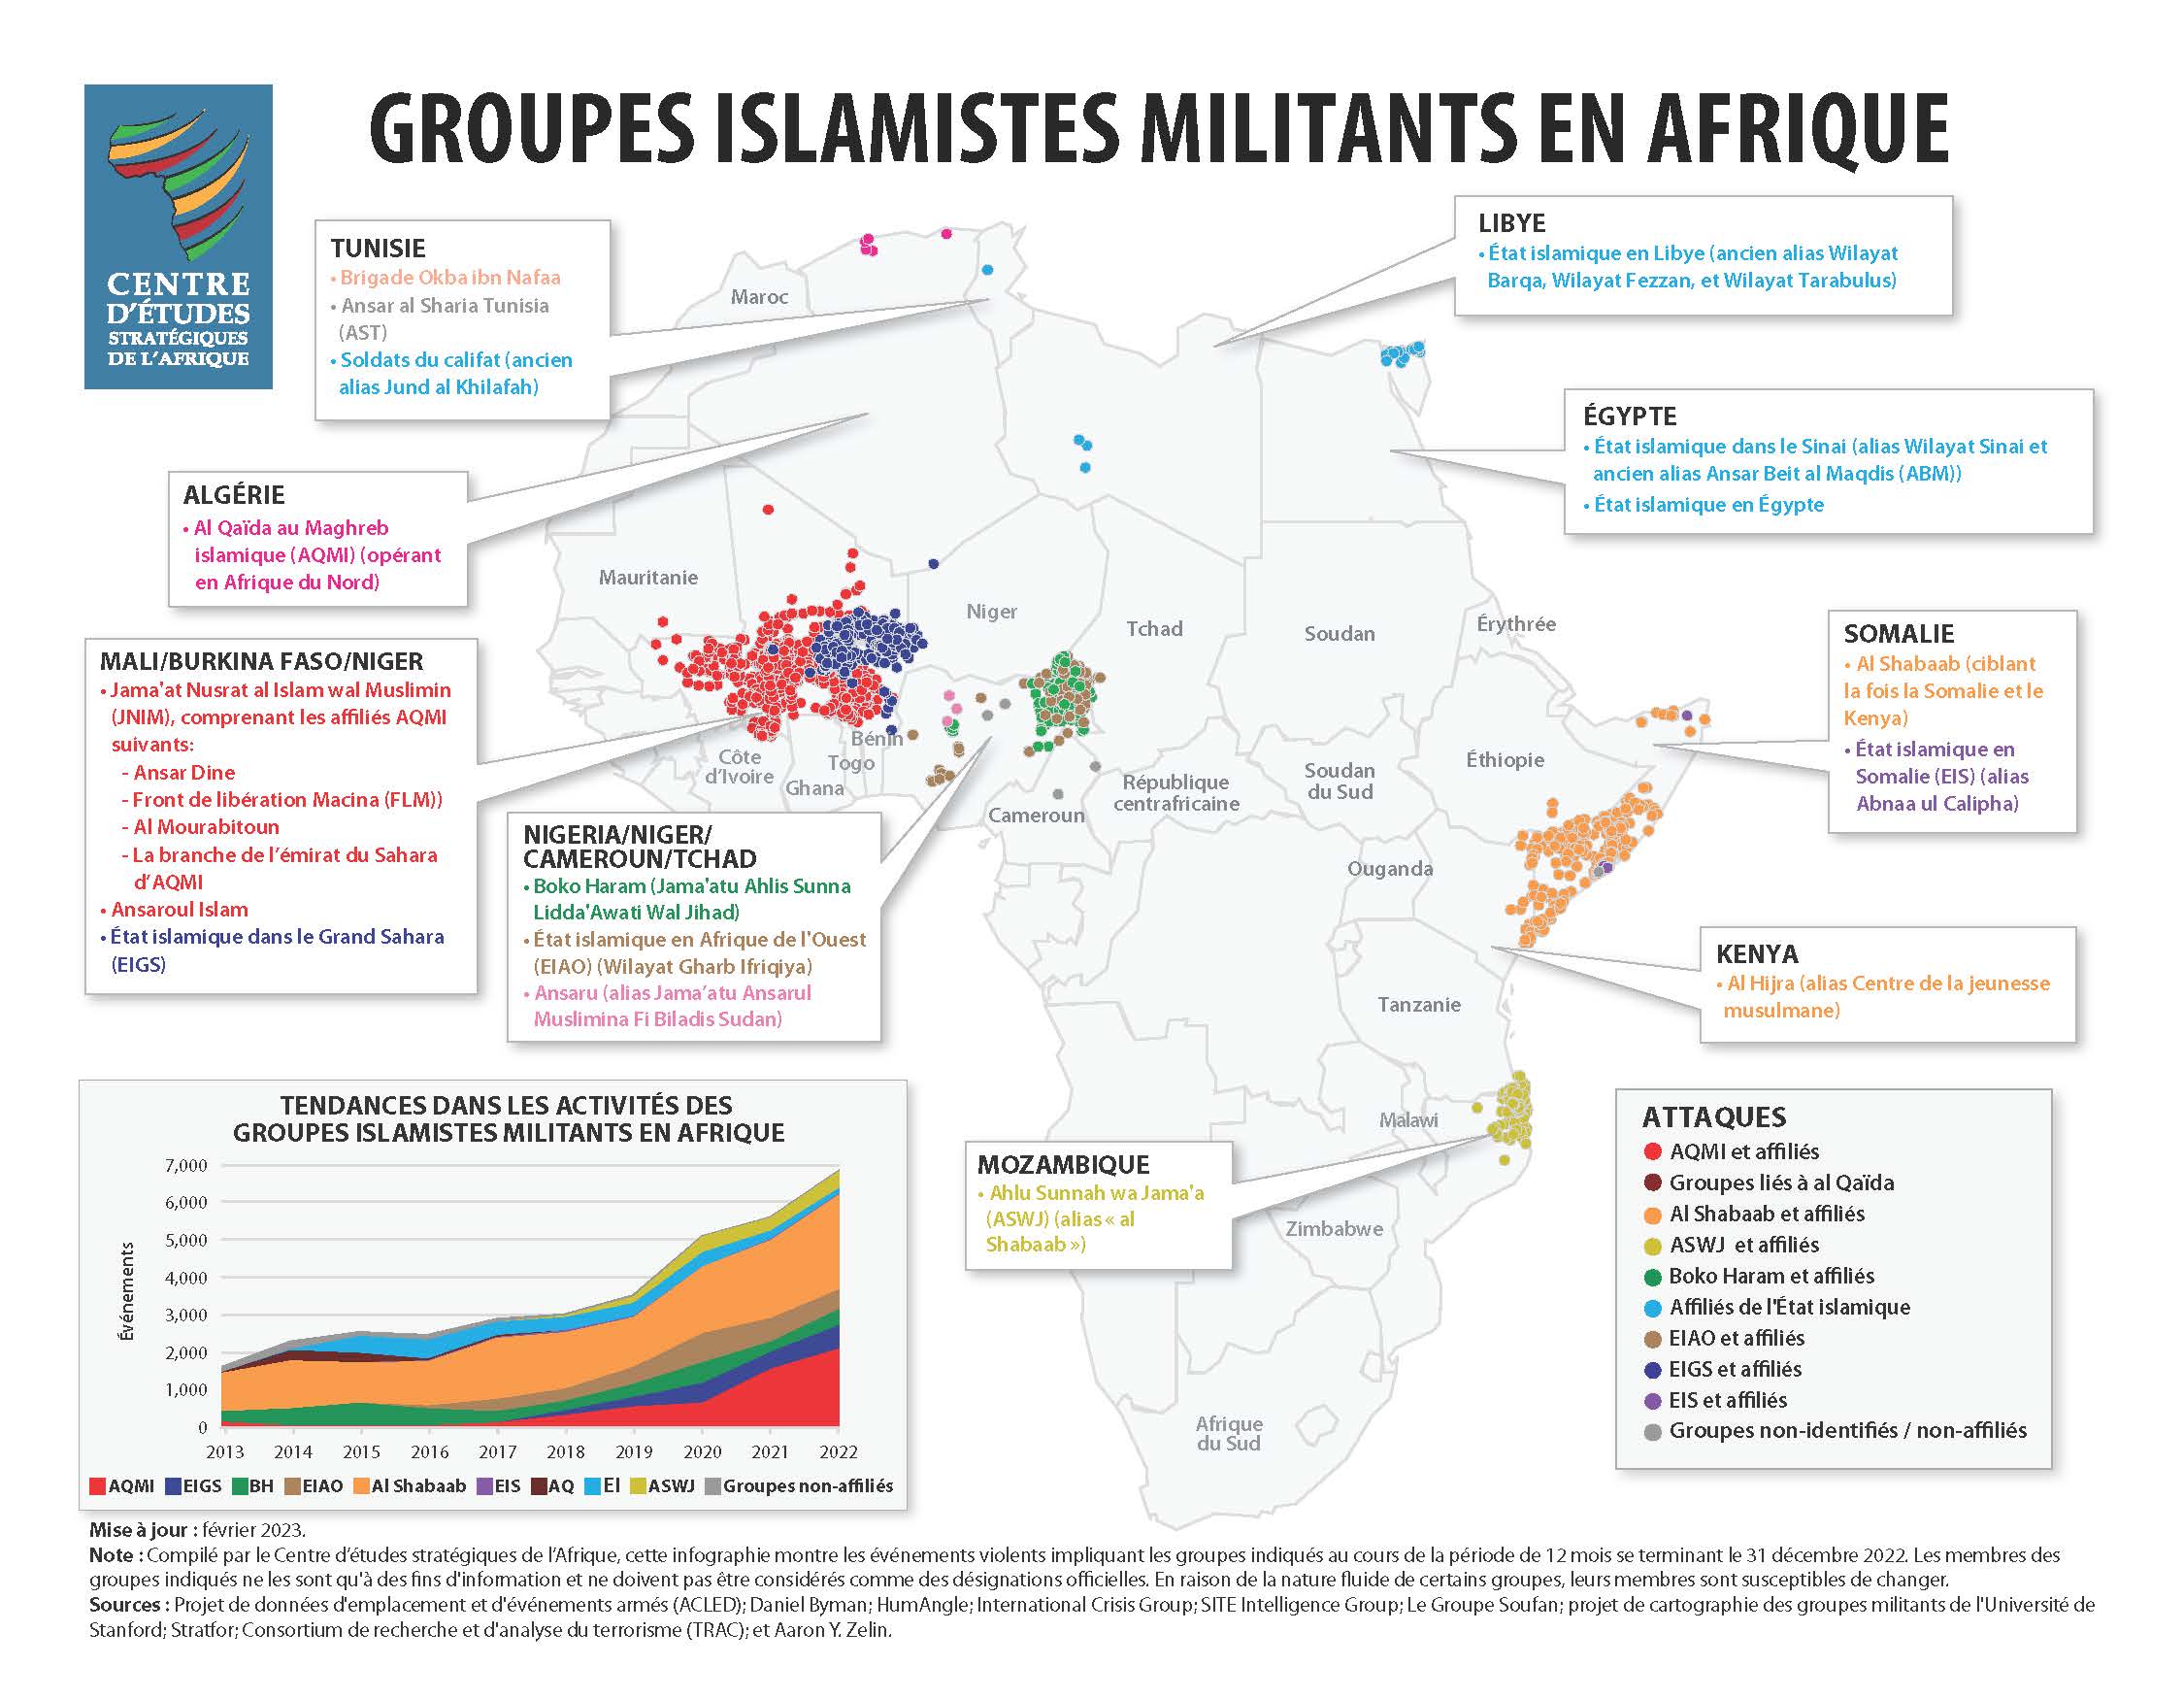 Map - Africa's Active Militant Islamist Groups, January 2023